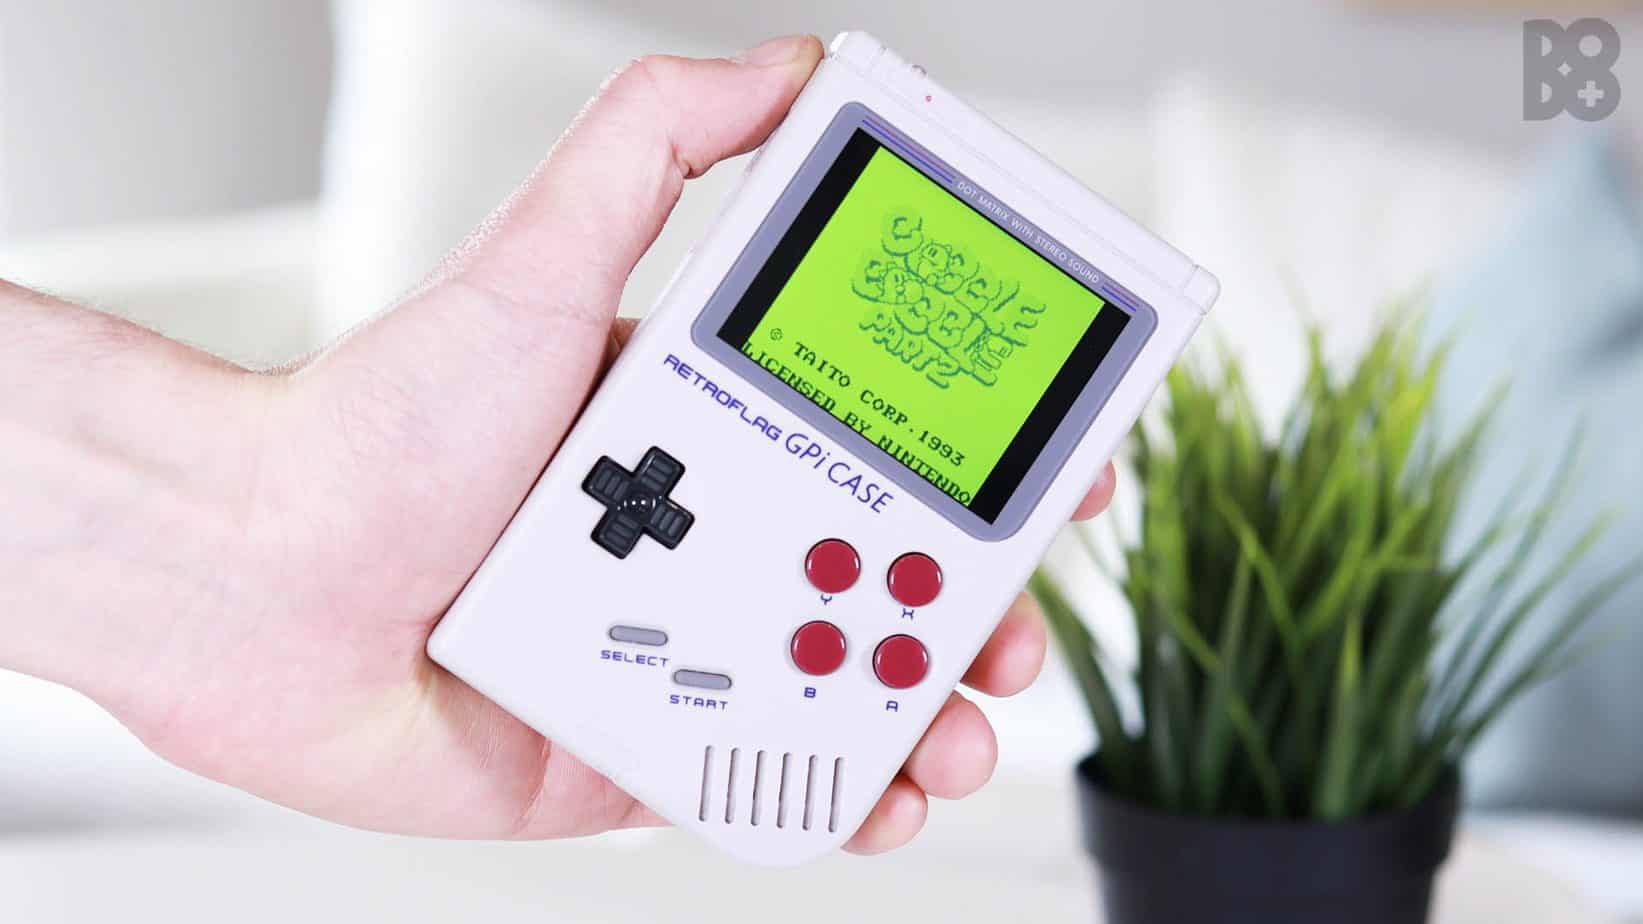 RetroFlag GPI Case Review - A Gameboy With A Twist